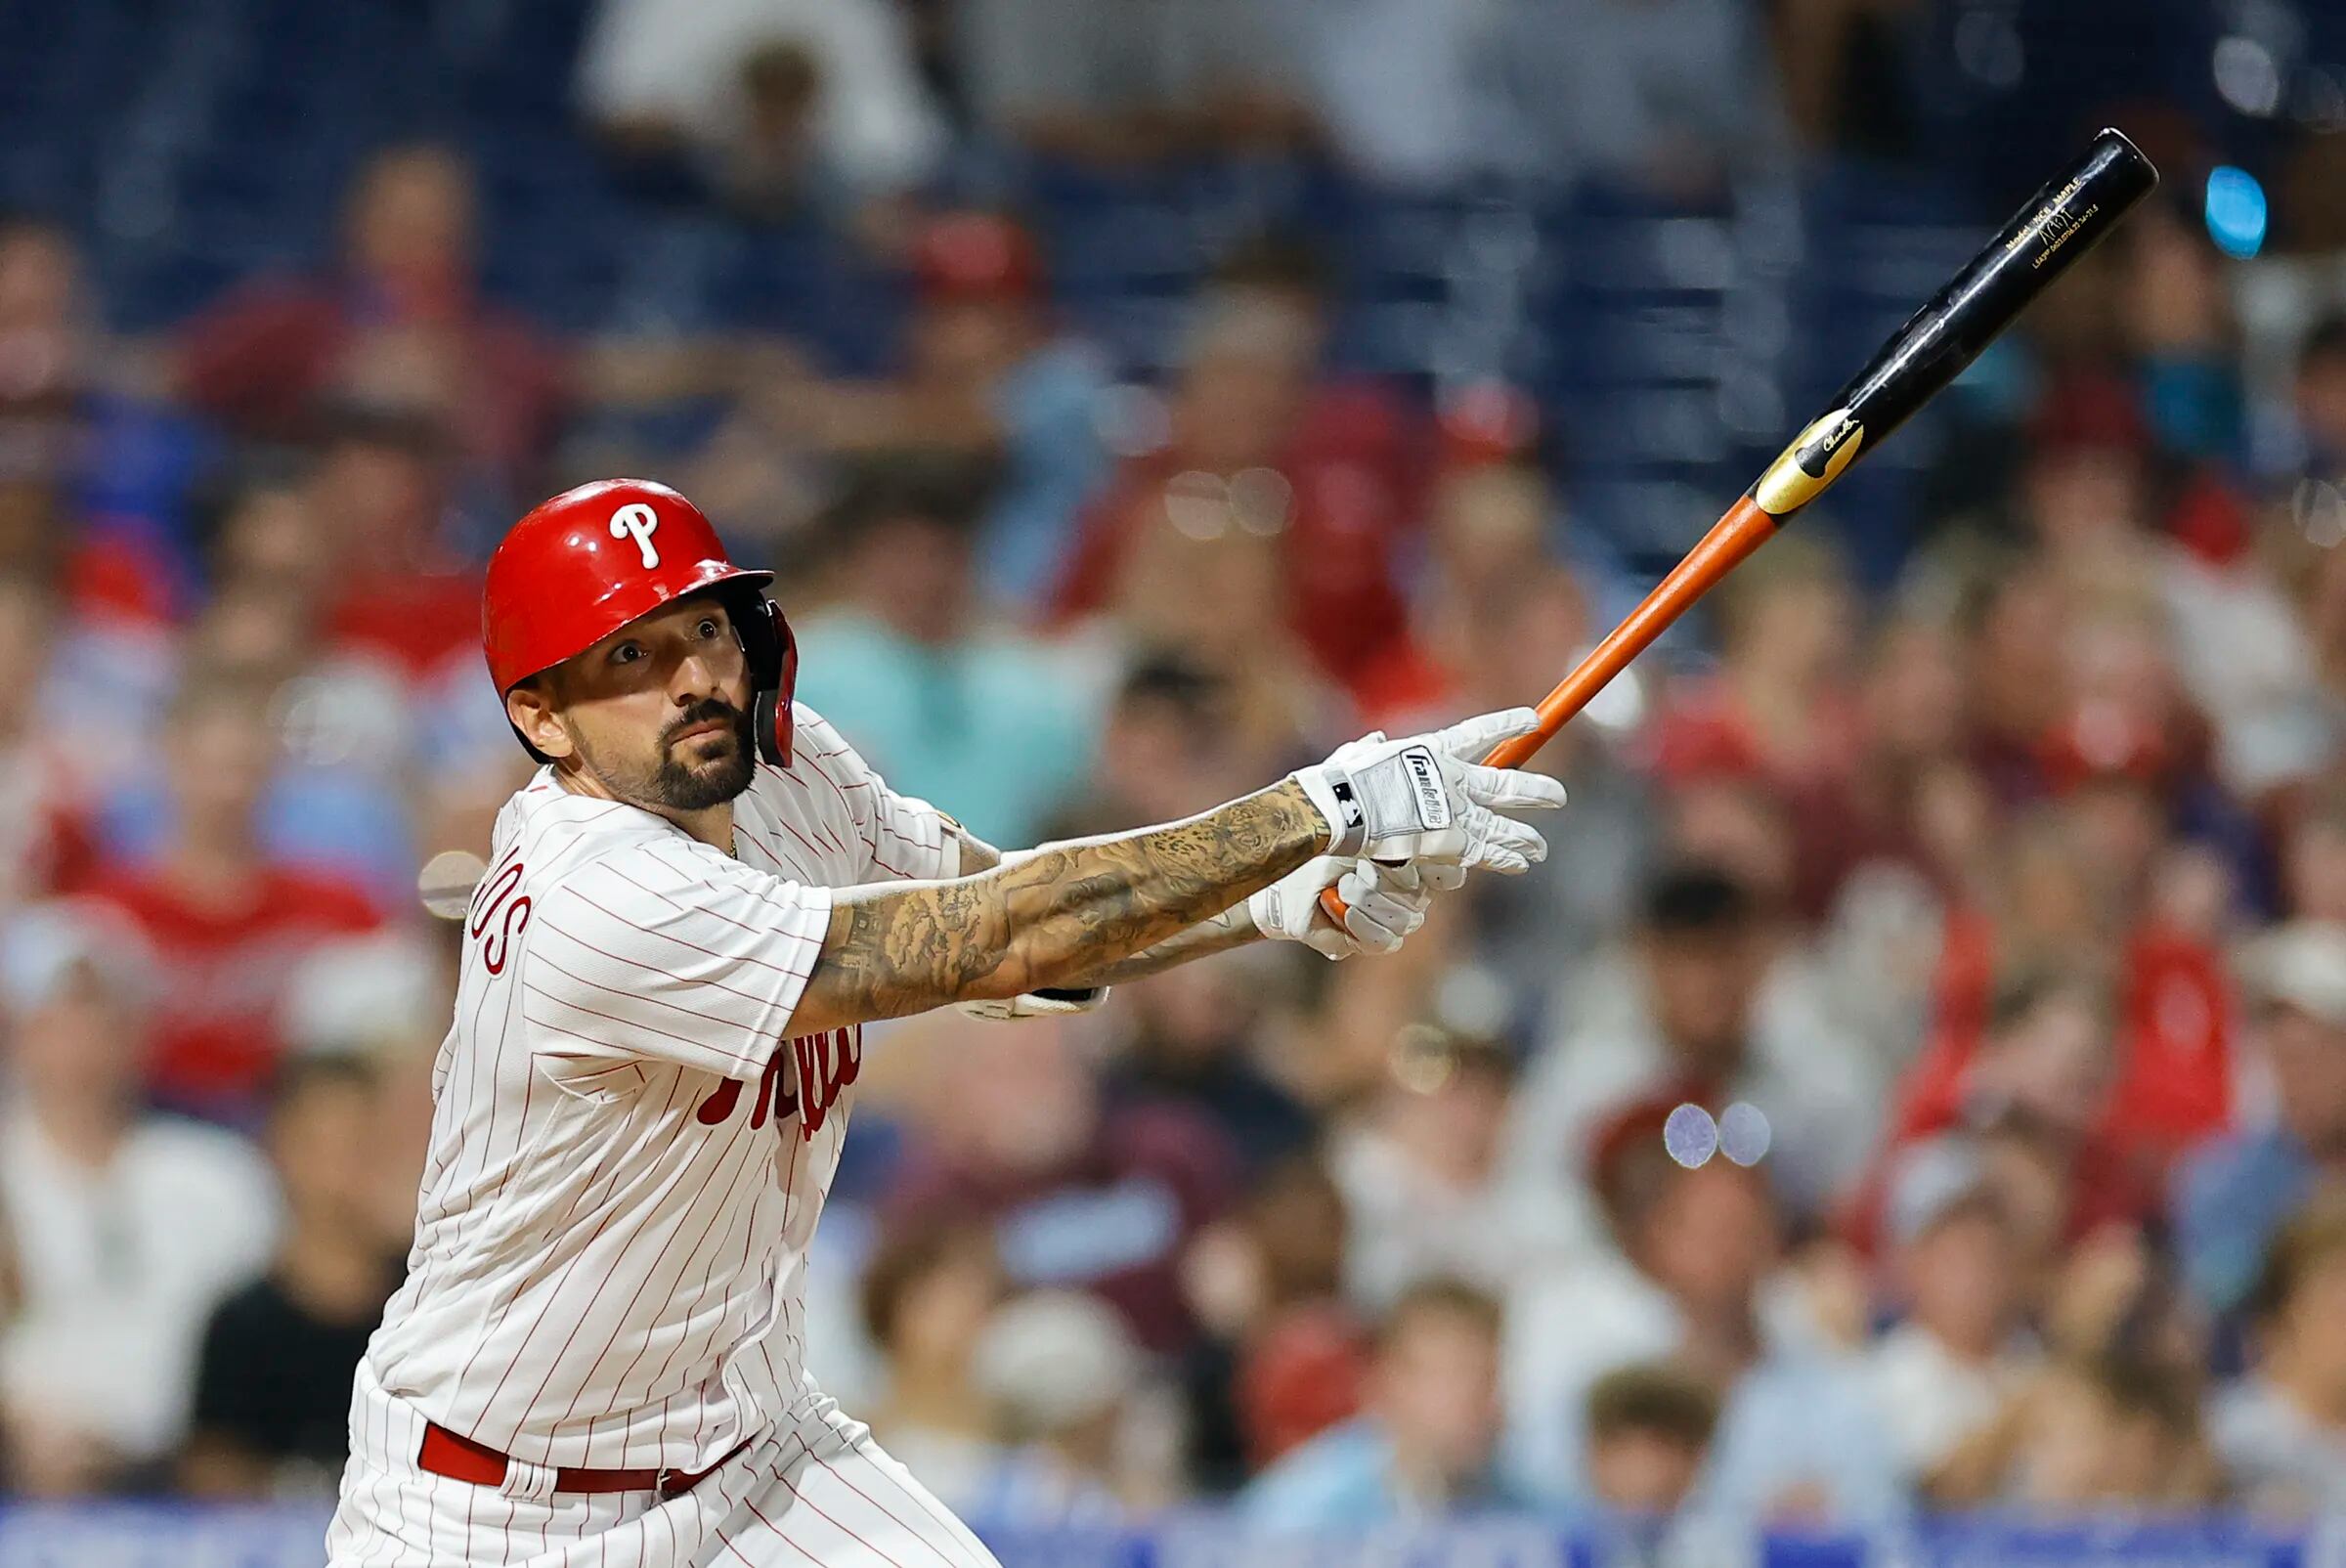 Nick Castellanos thinks this Phillies run could be the start of something  bigger  Phillies Nation - Your source for Philadelphia Phillies news,  opinion, history, rumors, events, and other fun stuff.